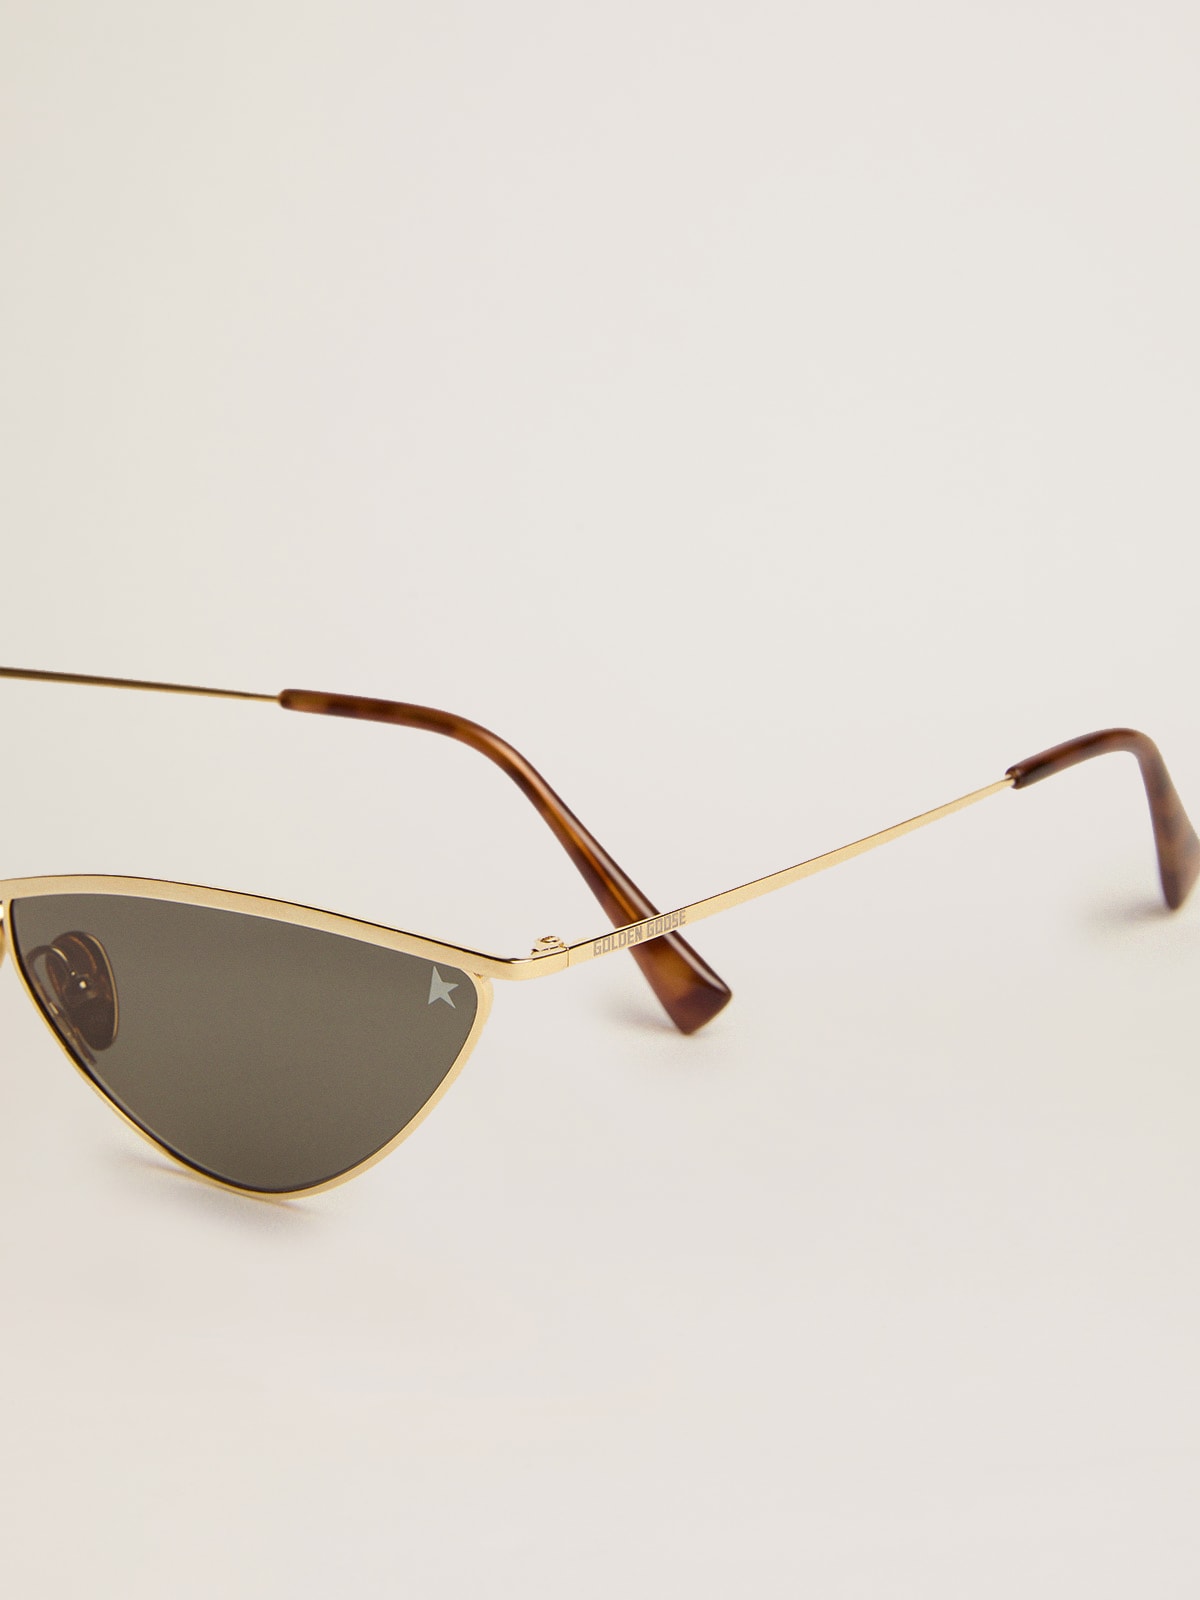 Golden Goose - Sunglasses cat-eye style with gold frame and green lenses in 